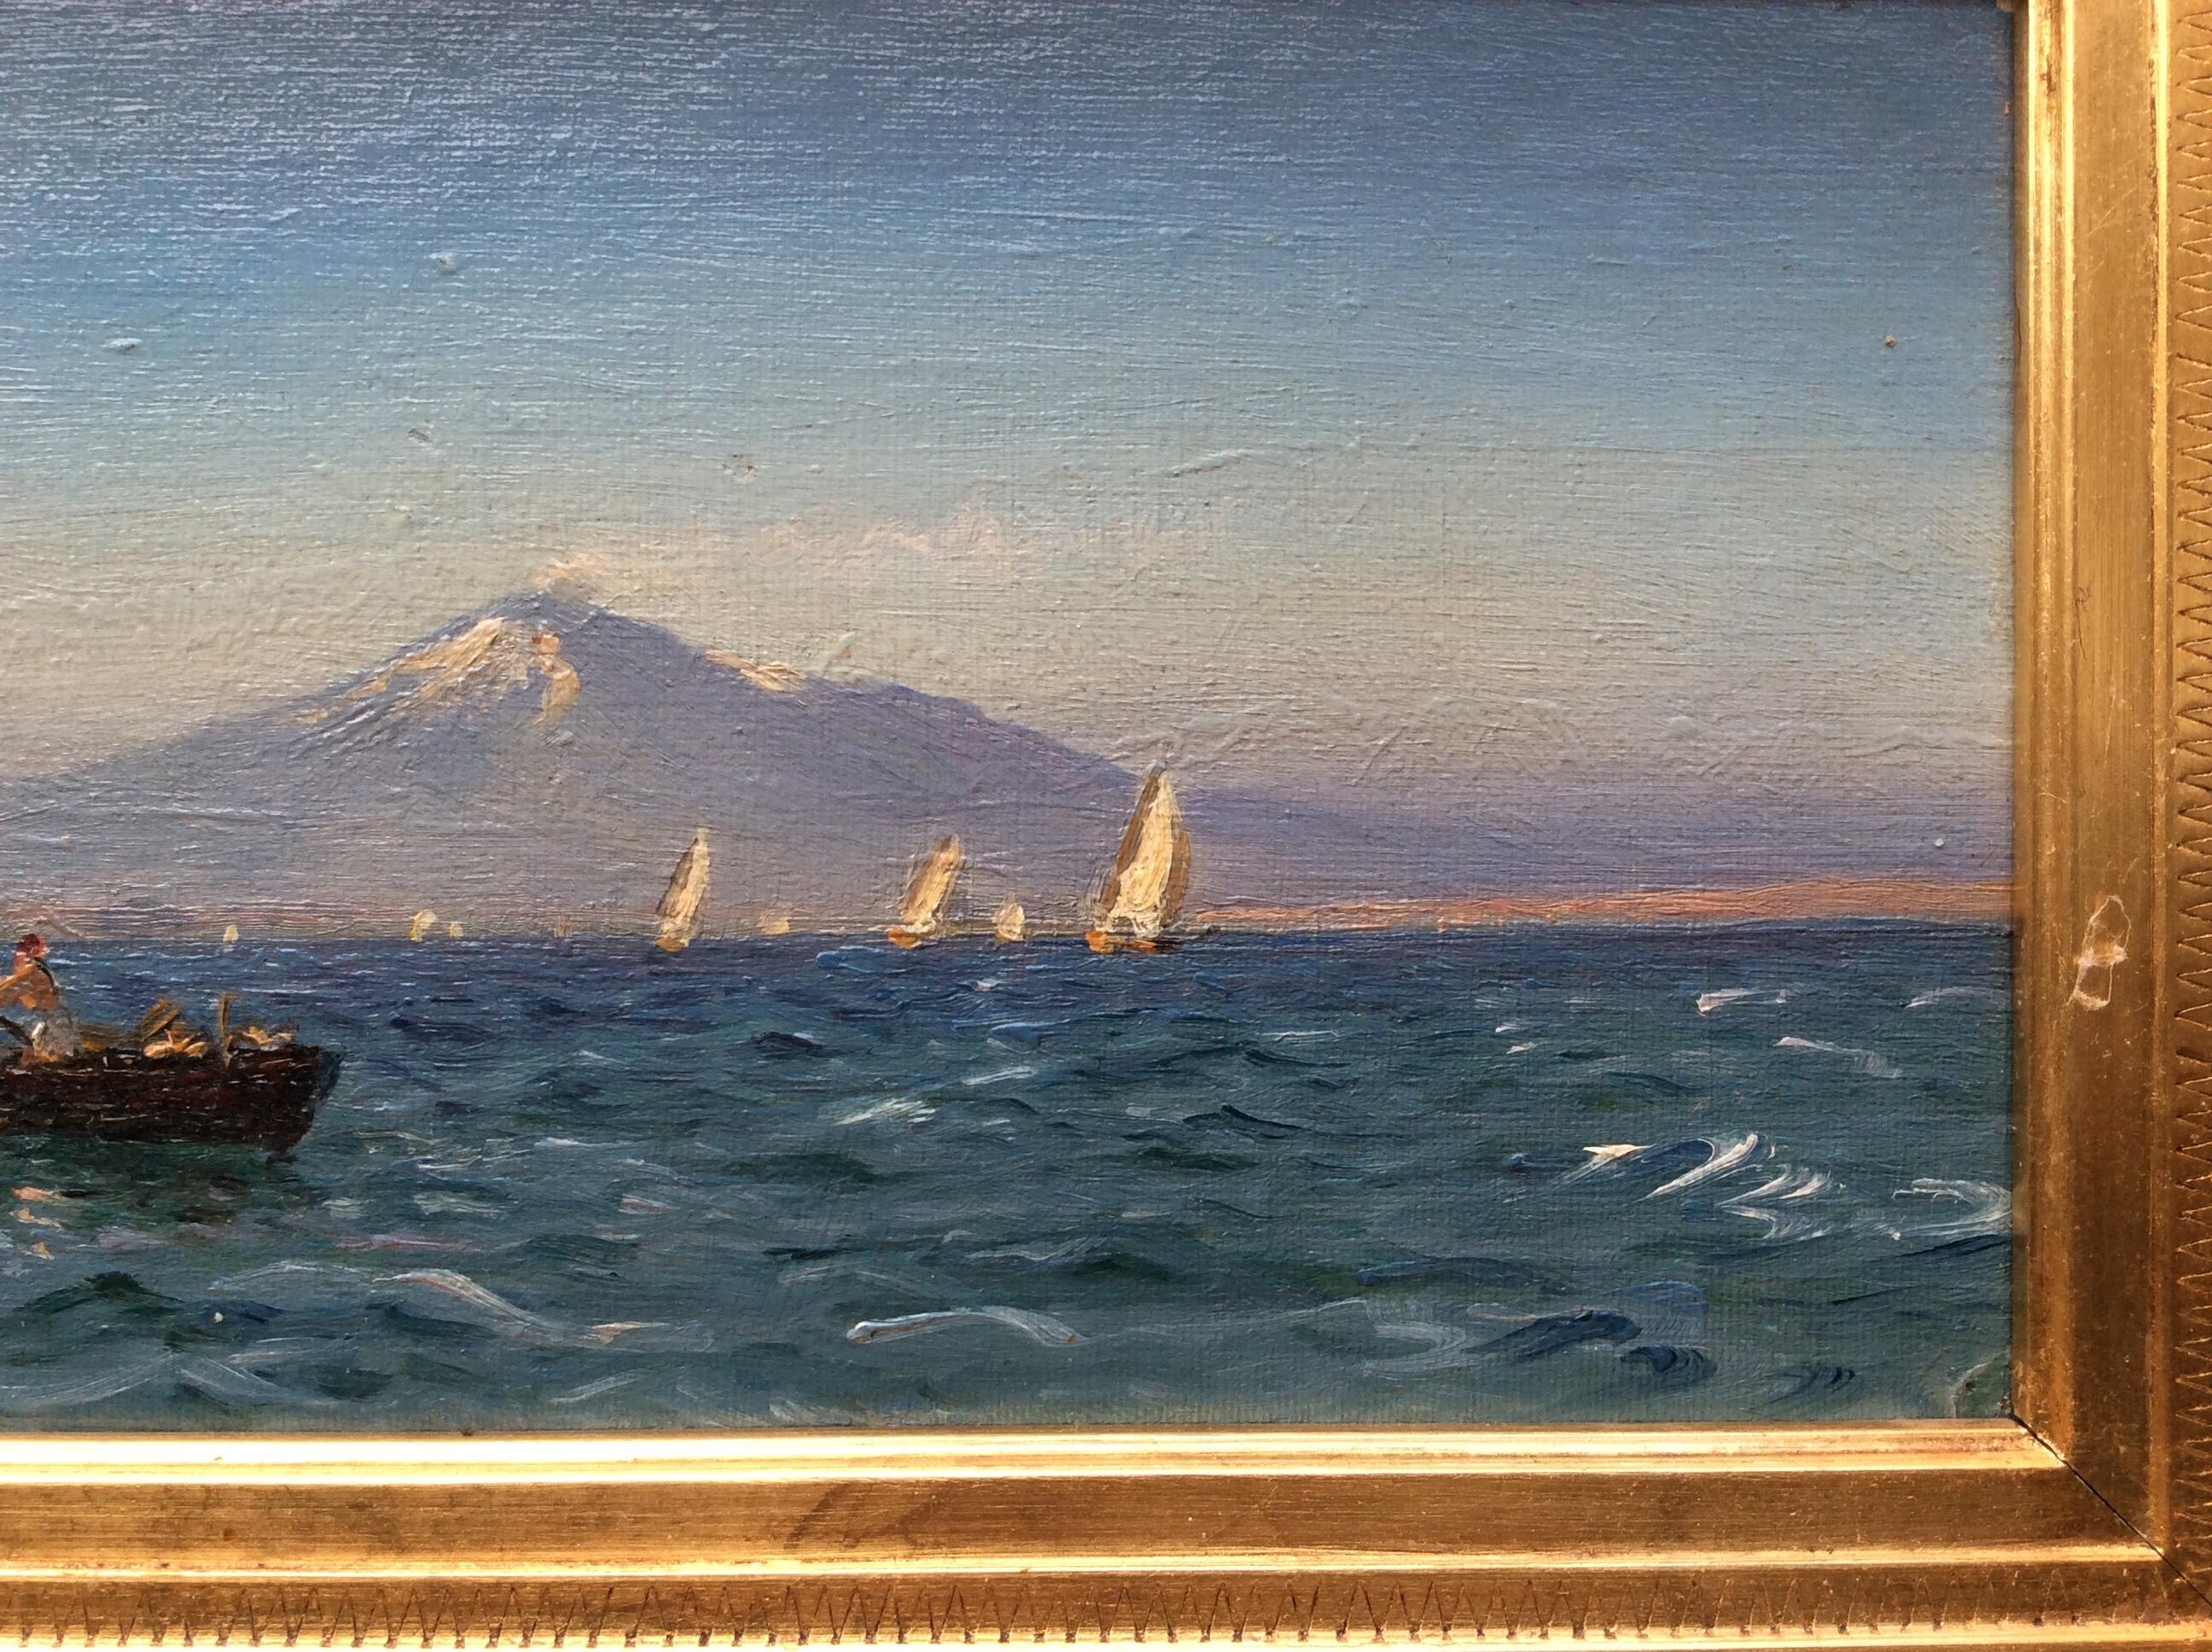 A painting signed H.Lubbers 1911 from the bay of Neaples, with Vesuv in background. Holger Lubbers 1850-1931.